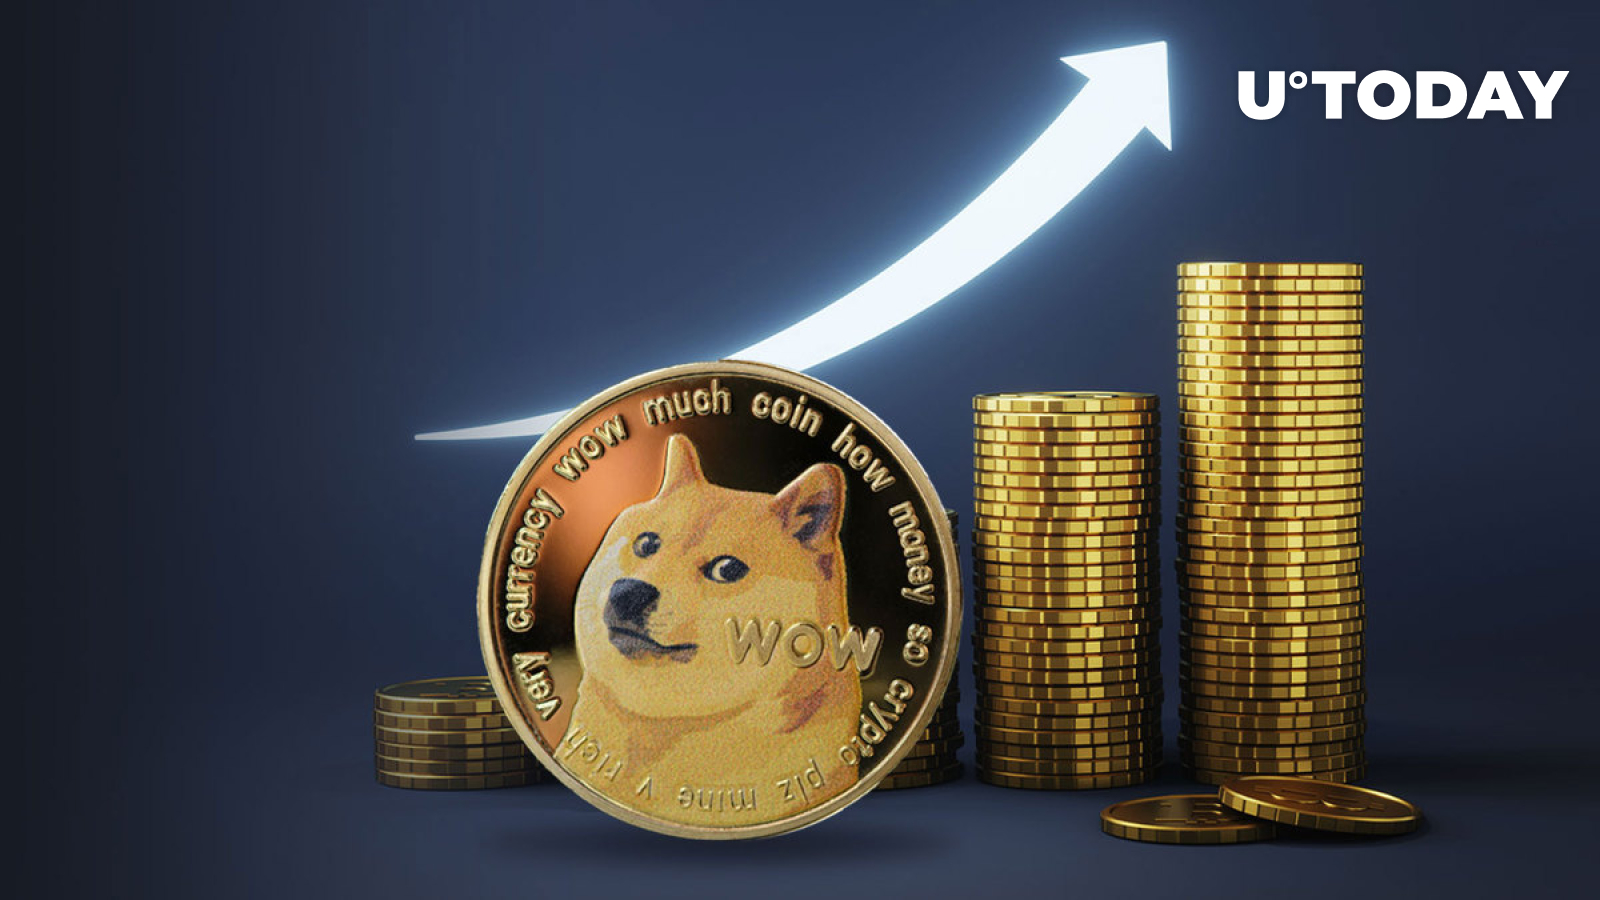 DOGE Price Prints Surge, While Dogecoin Shifts into ‘Greed’ Zone